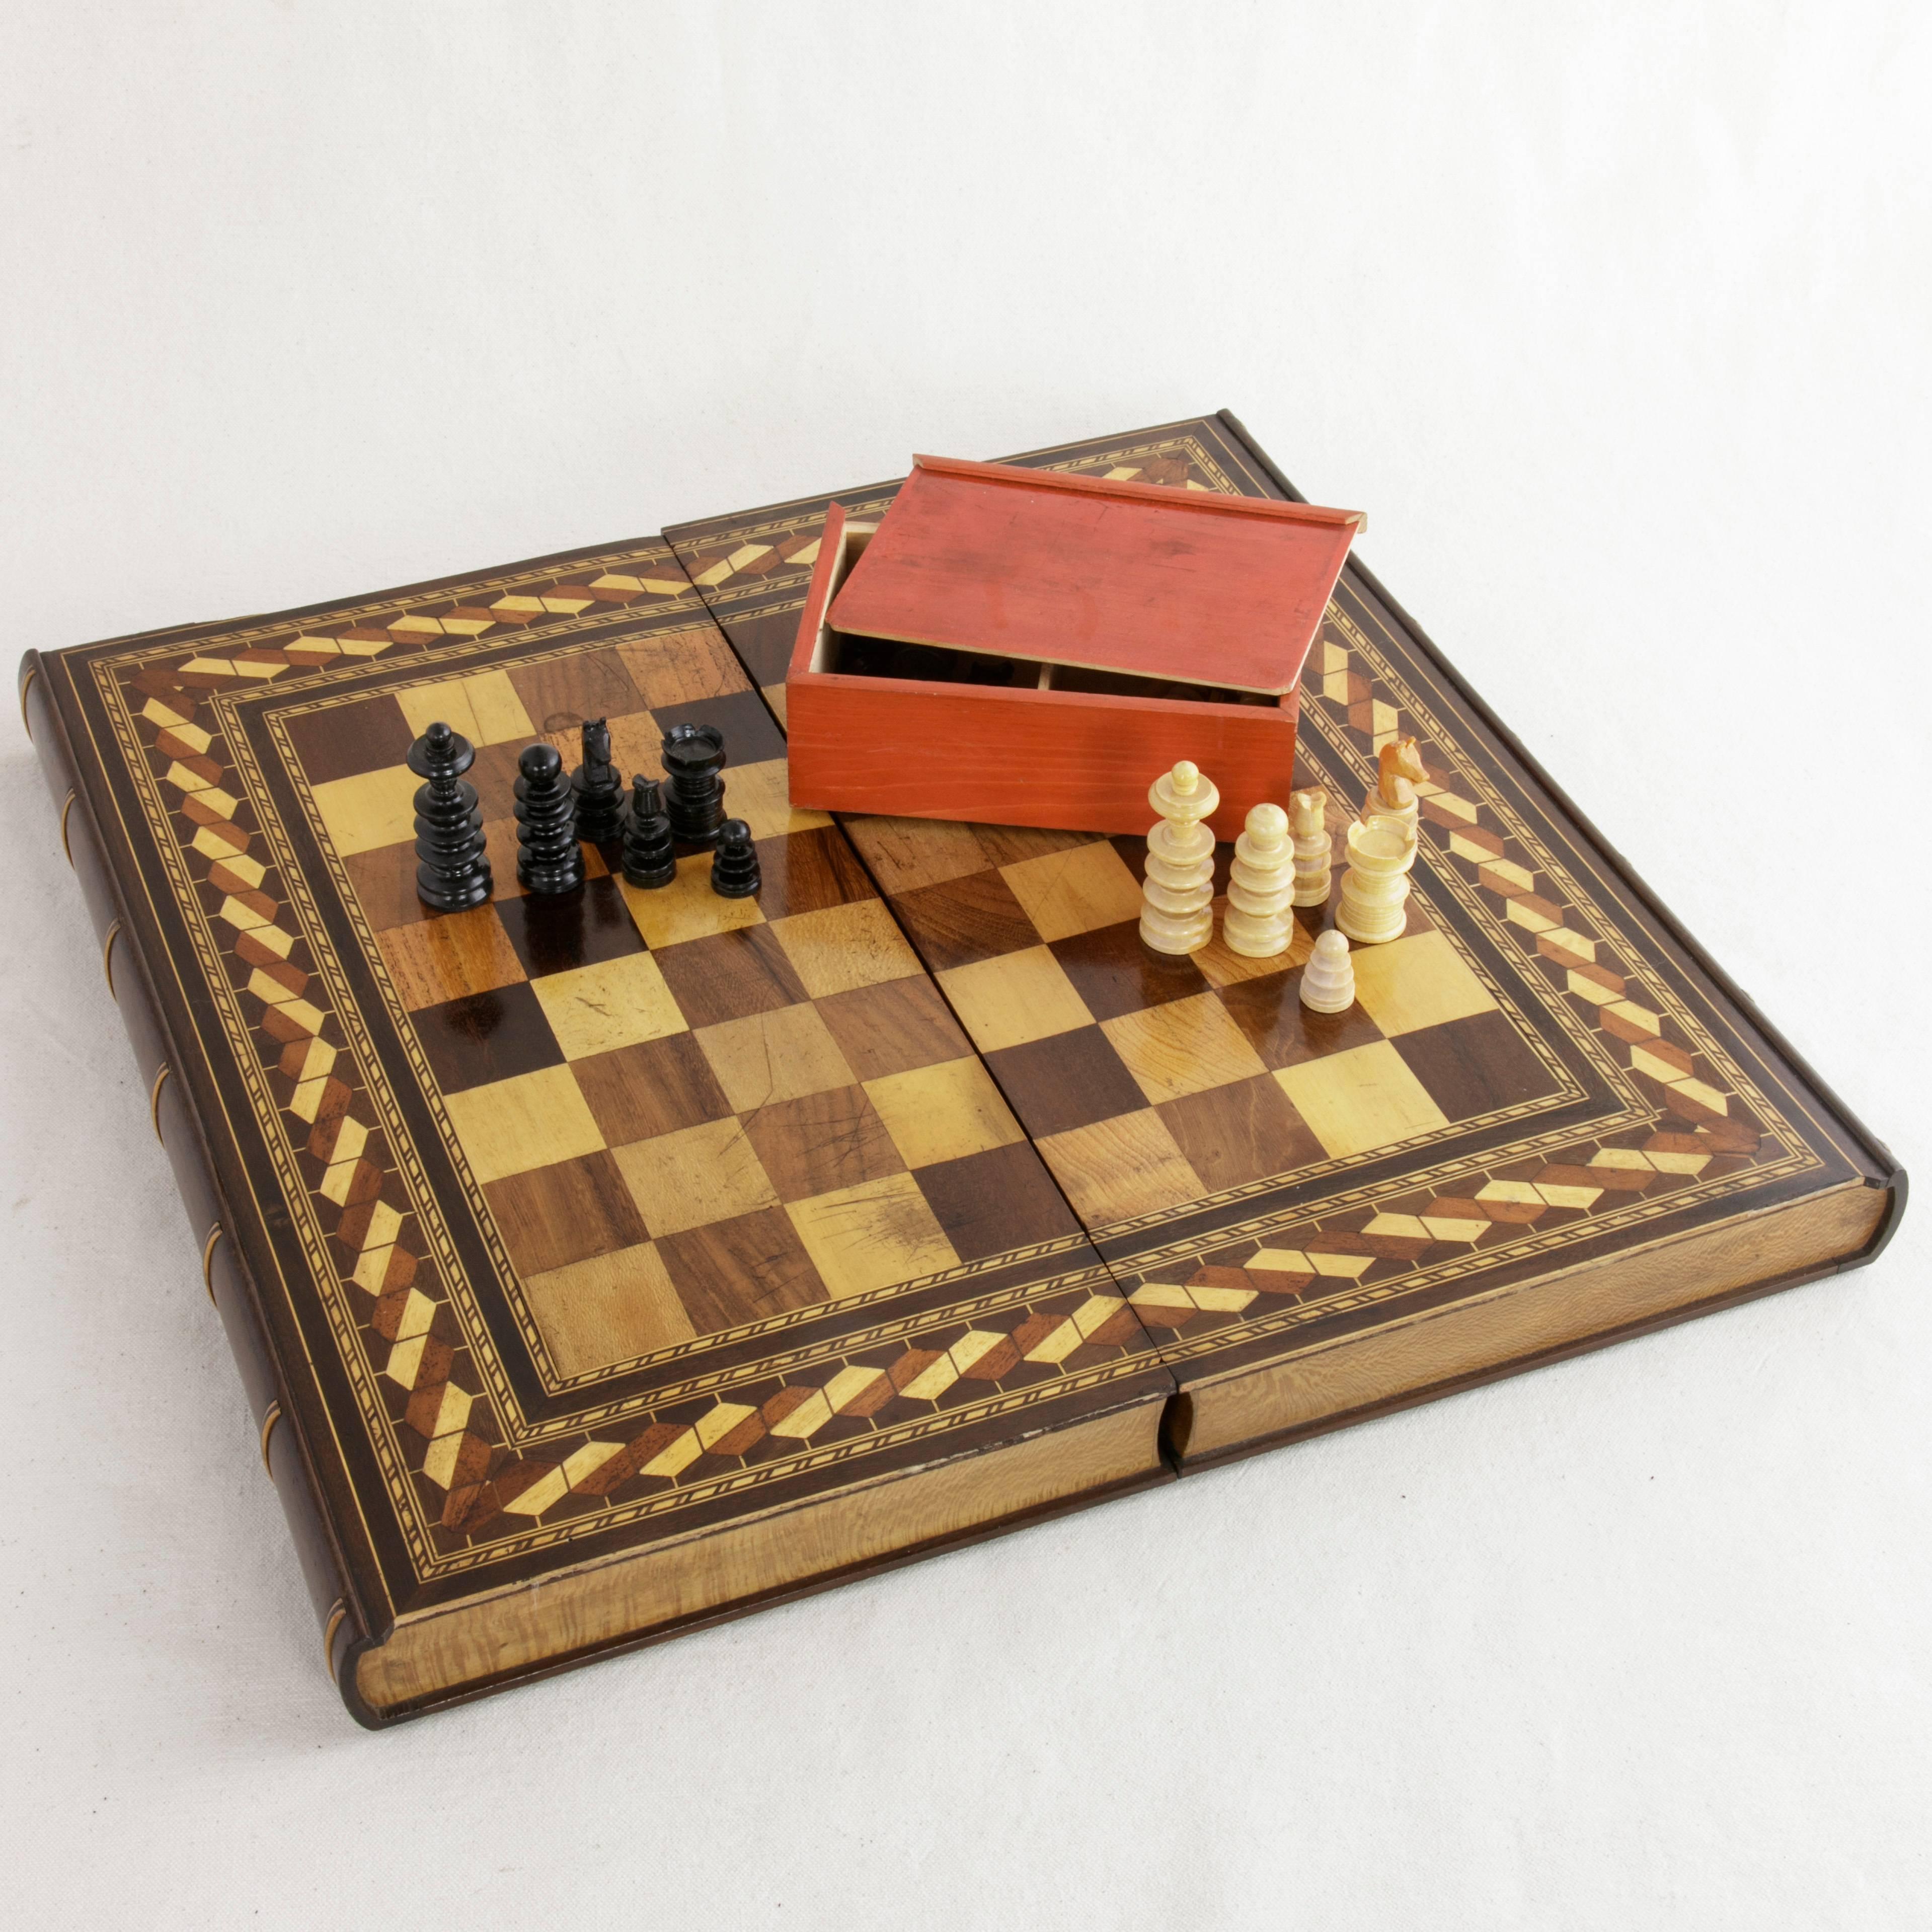 Taking the form of two stacked books, this hinged marquetry game box features a chess and checker board on the exterior and marquetry backgammon board on the interior. Displaying intricate inlay of exotic woods in geometric patterns, this box